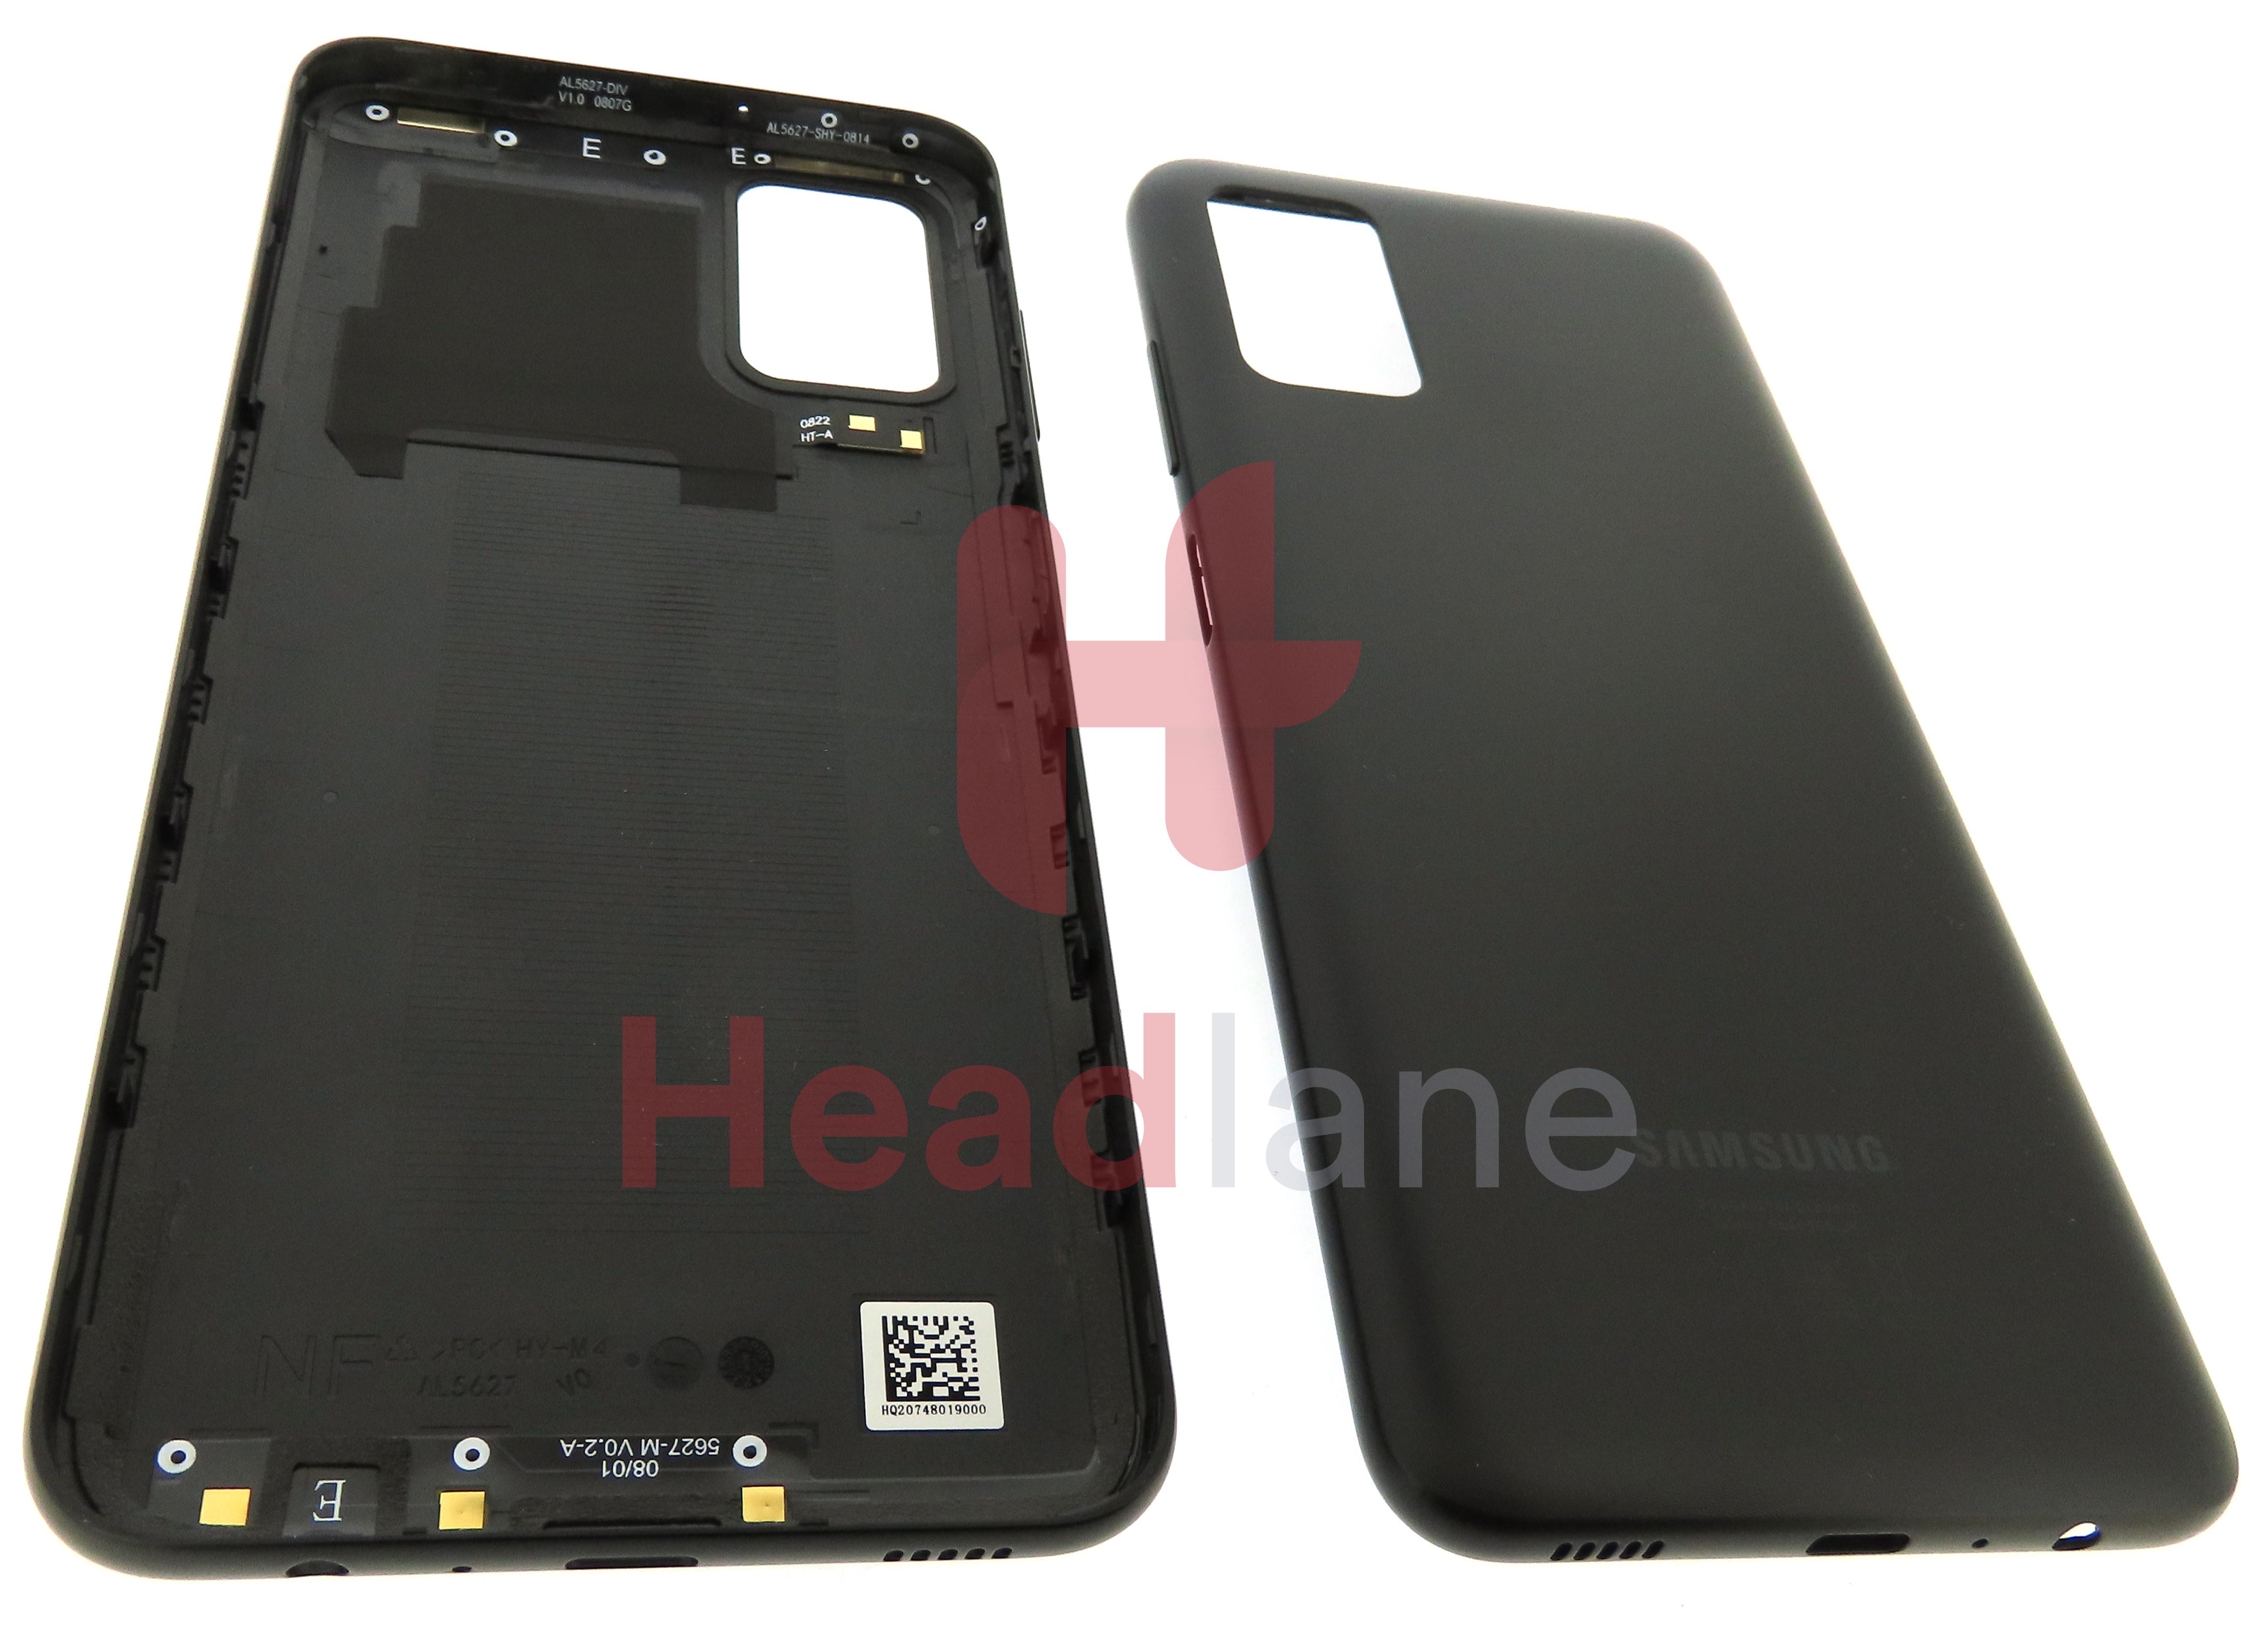 Samsung SM-A037 Galaxy A03s Back / Battery Cover - Black